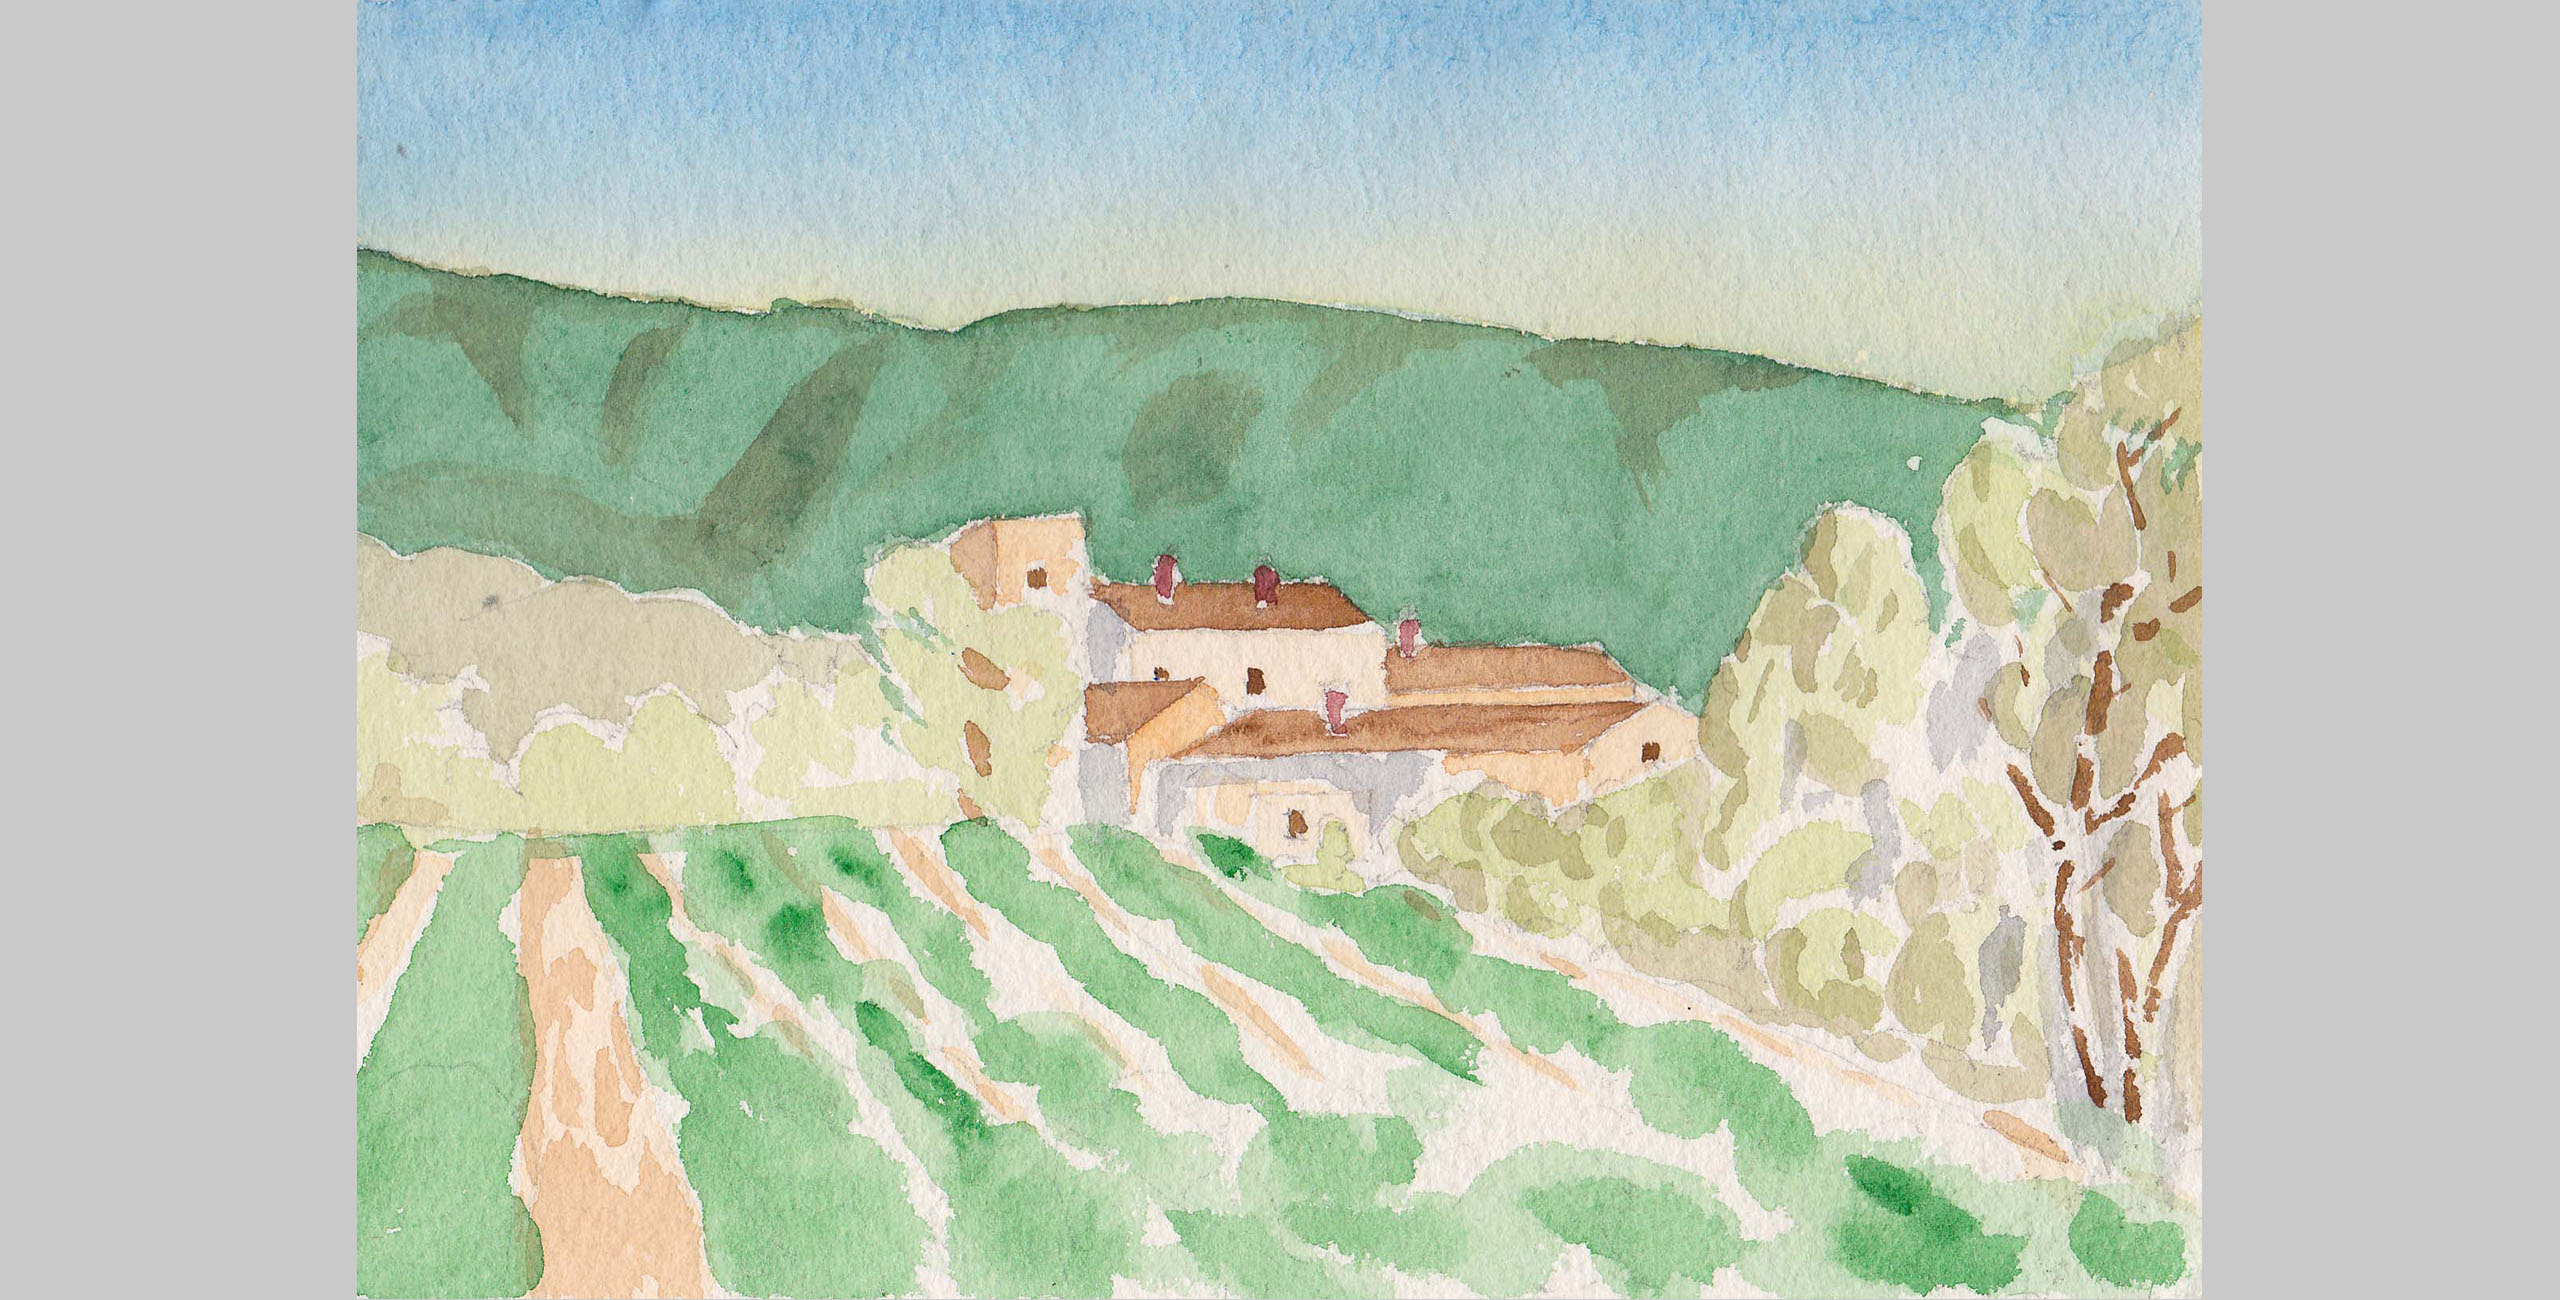 France 2, 2001, watercolor, 5 x 7 in.